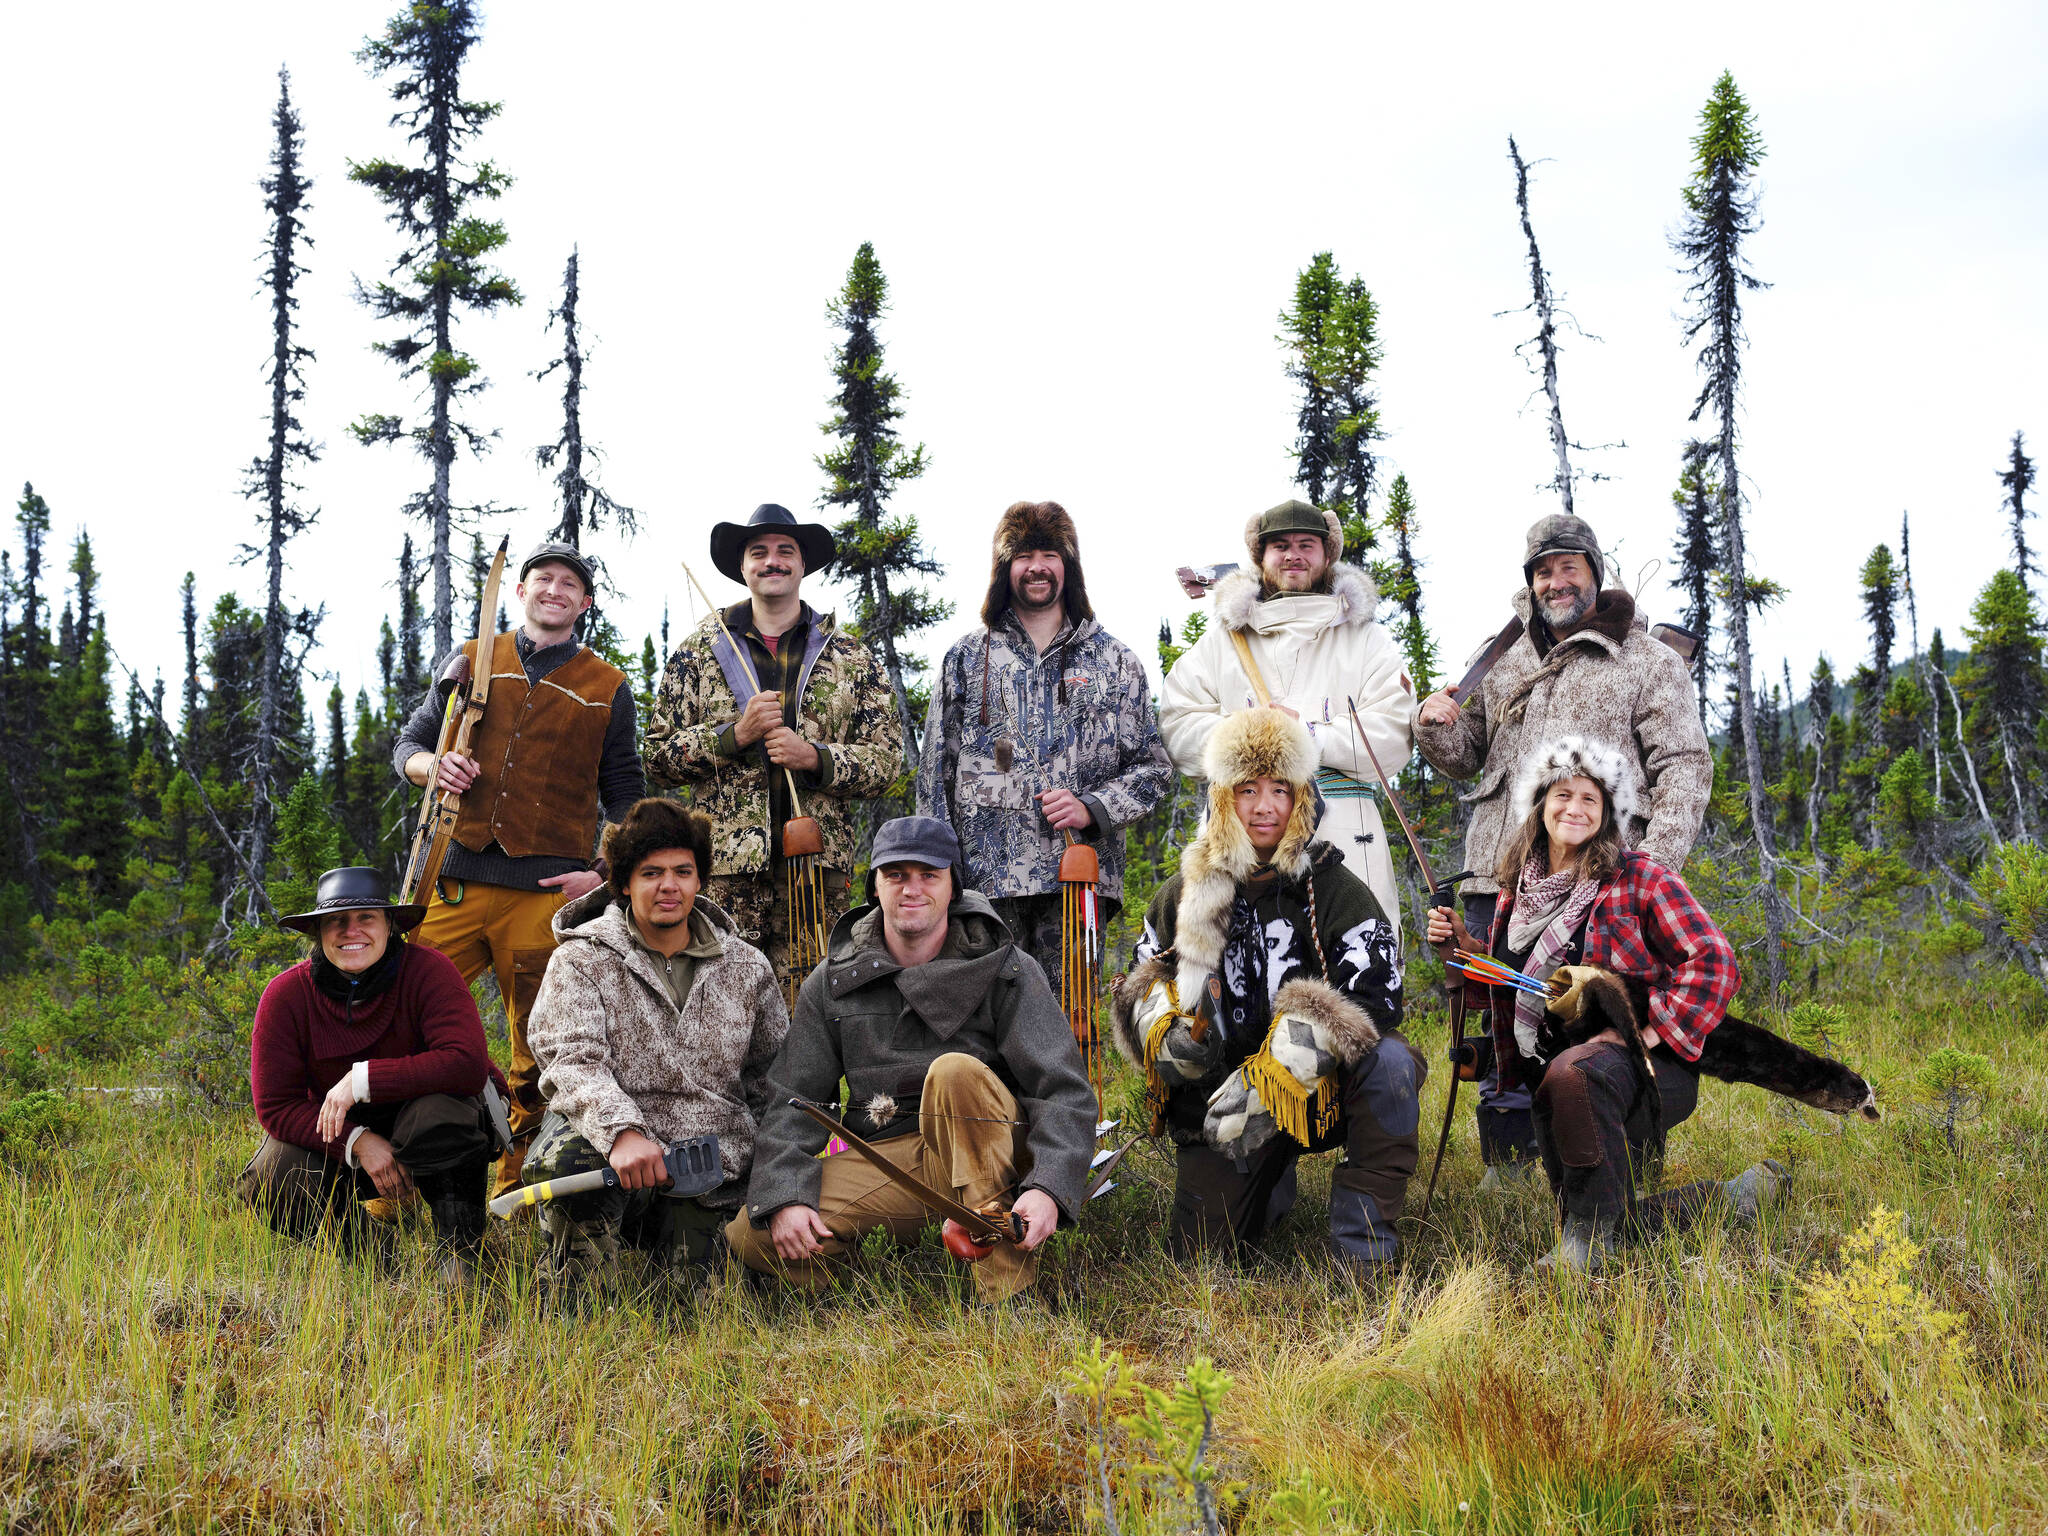 The 10 participants in season 9 of “Alone,” premiering on May 26, 2022, on the History Channel. Terry Burns of Homer is the third from left, back. Another Alaskan in the series, Jacques Tourcotte of Juneau, is the fourth from left, back. (Photo by Brendan George Ko/History Channel)